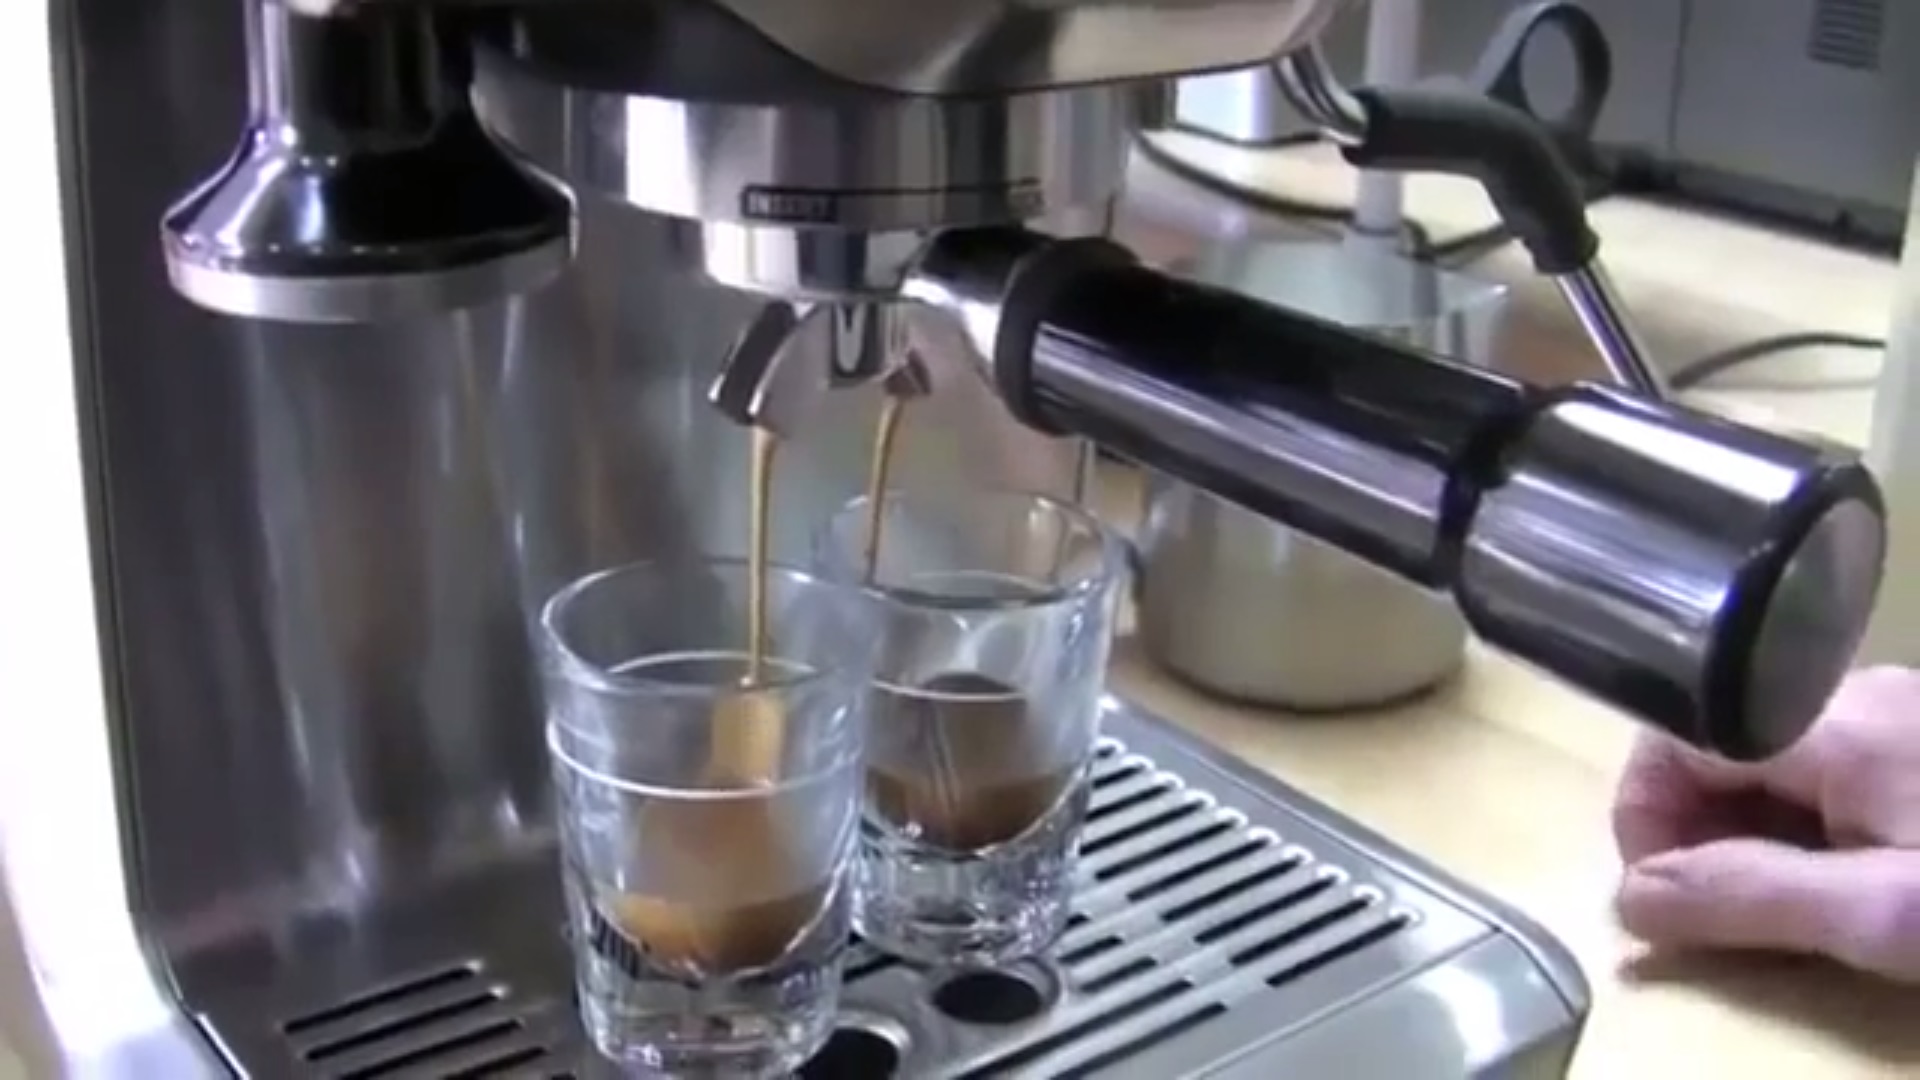 How long does it take to descale Breville Barista Express?